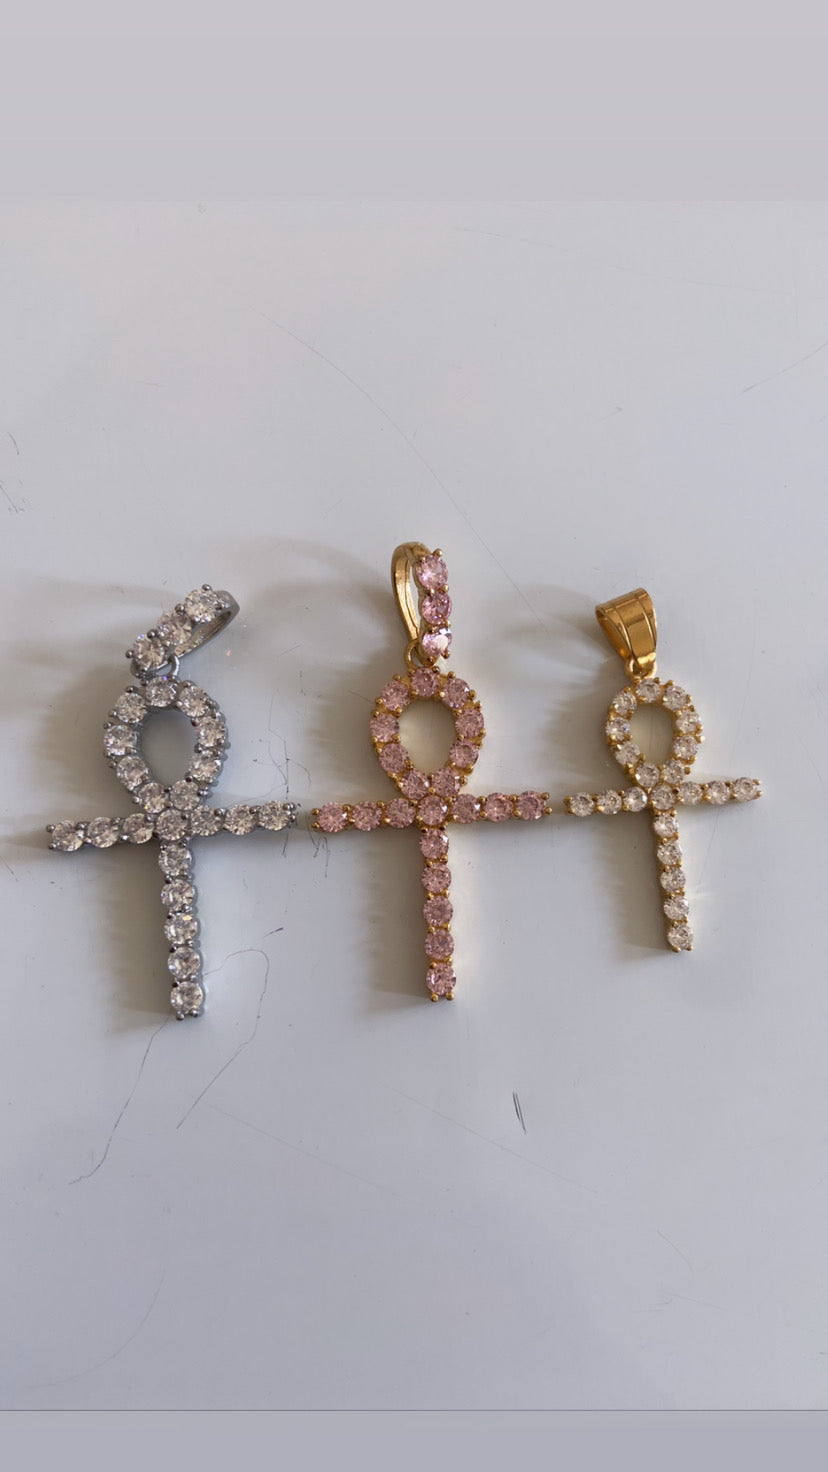 Ankh necklaces